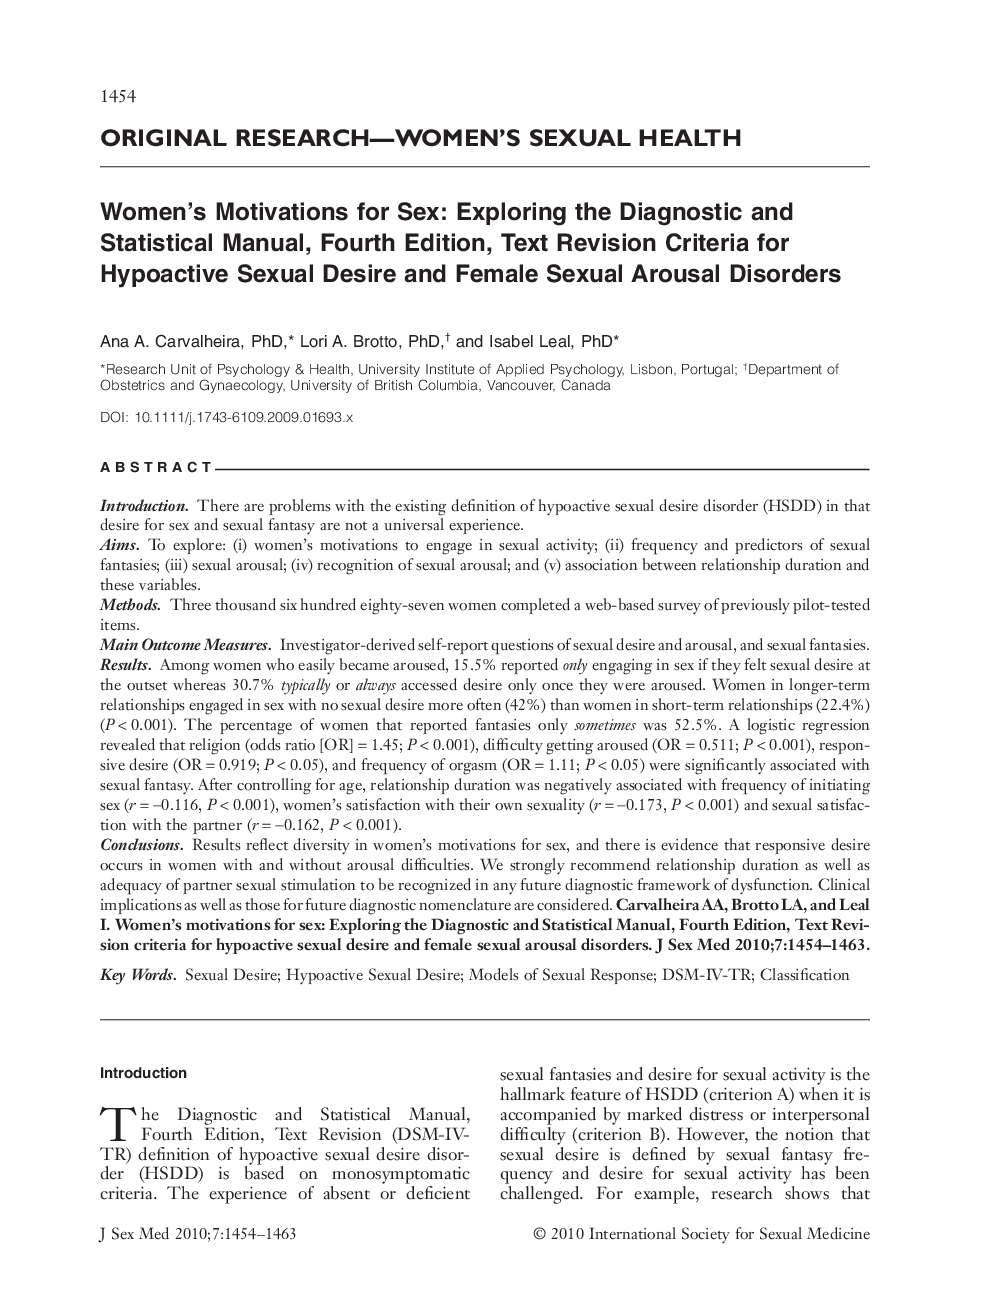 Women's Motivations for Sex: Exploring the Diagnostic and Statistical Manual, Fourth Edition, Text Revision Criteria for Hypoactive Sexual Desire and Female Sexual Arousal Disorders